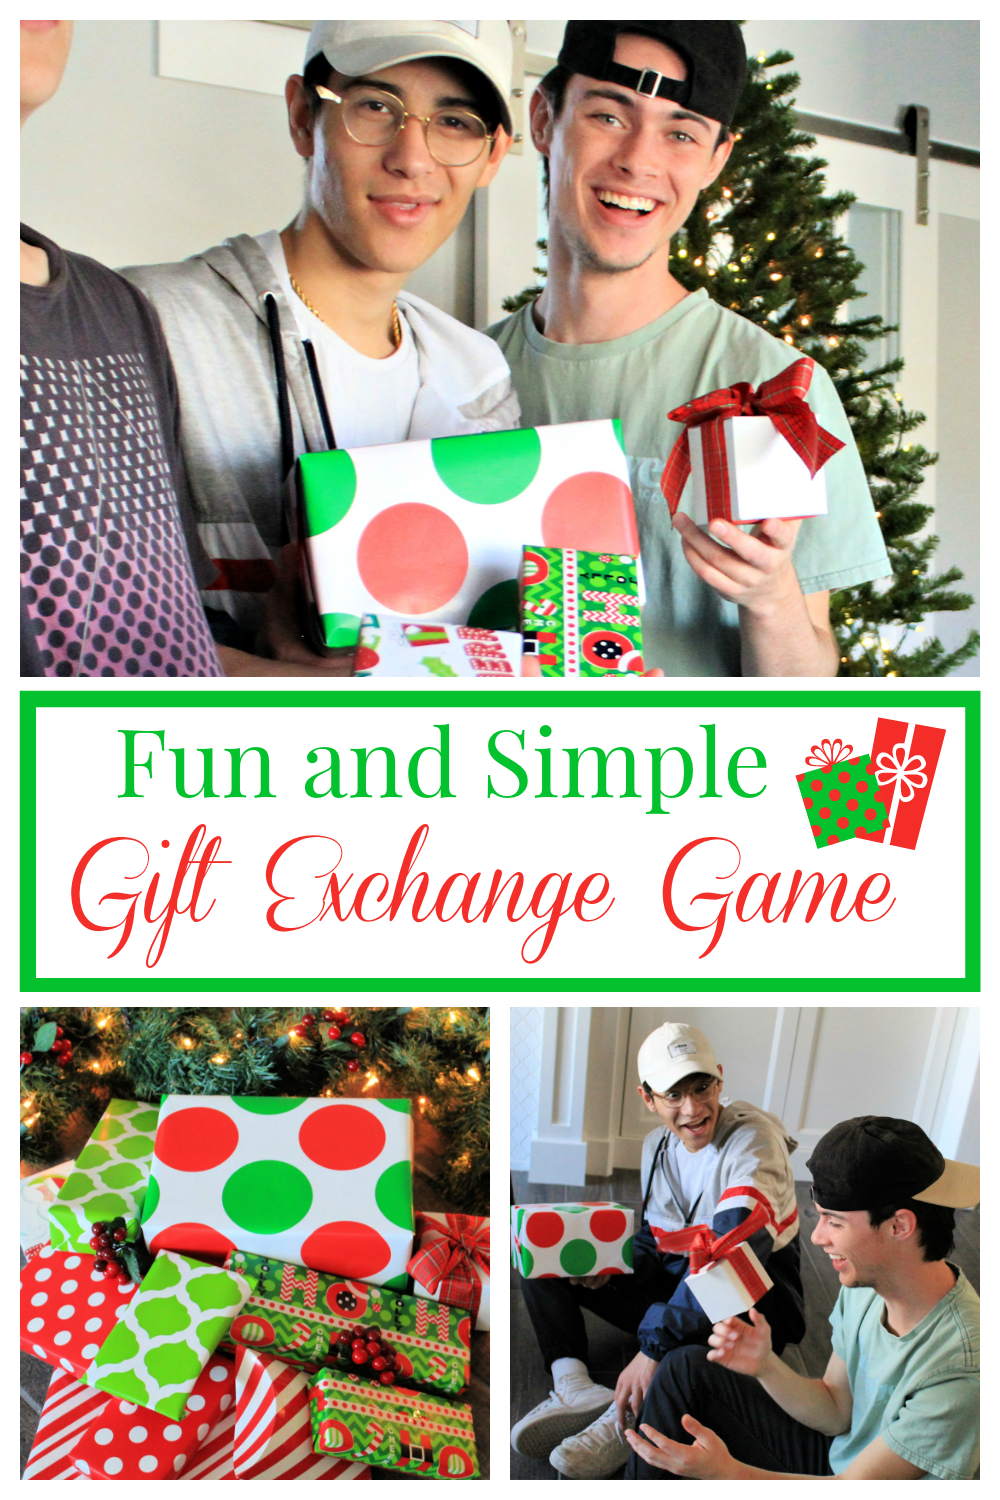 Fun and Simple Gift Exchange Game. Perfect game to play at your next Christmas party. Fun Christmas party games for all ages. #Christmaspartygame #giftexchangegame #giftexchange #partygame #games